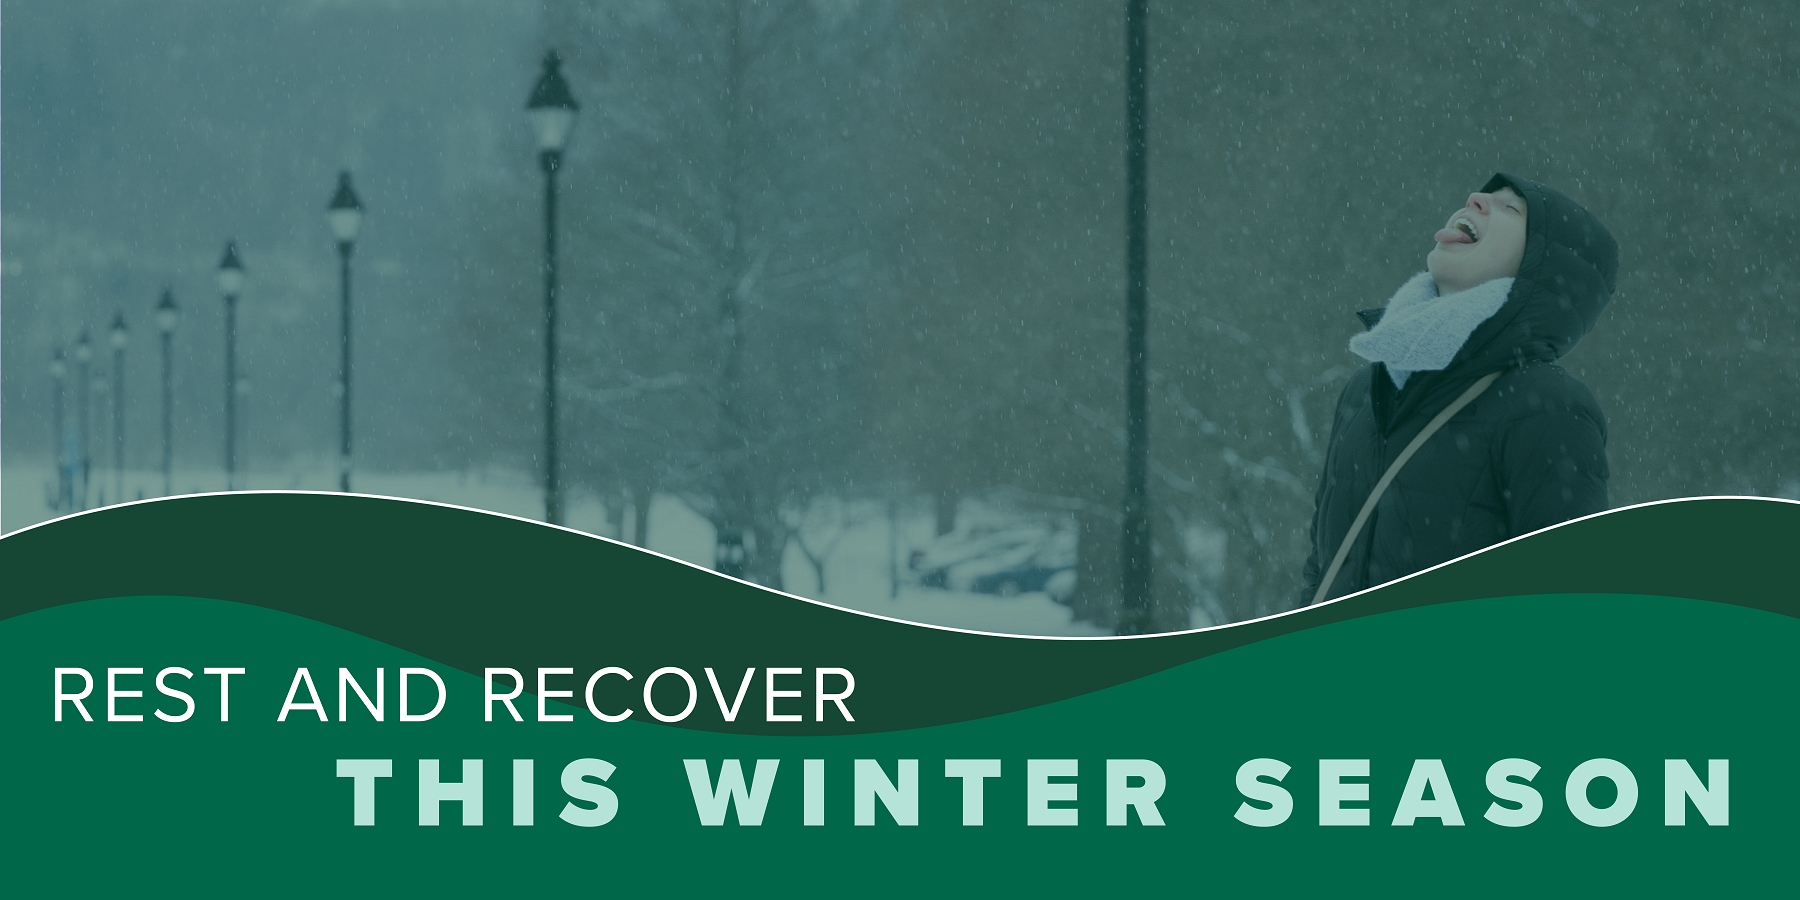 Rest and Recover This Winter Season